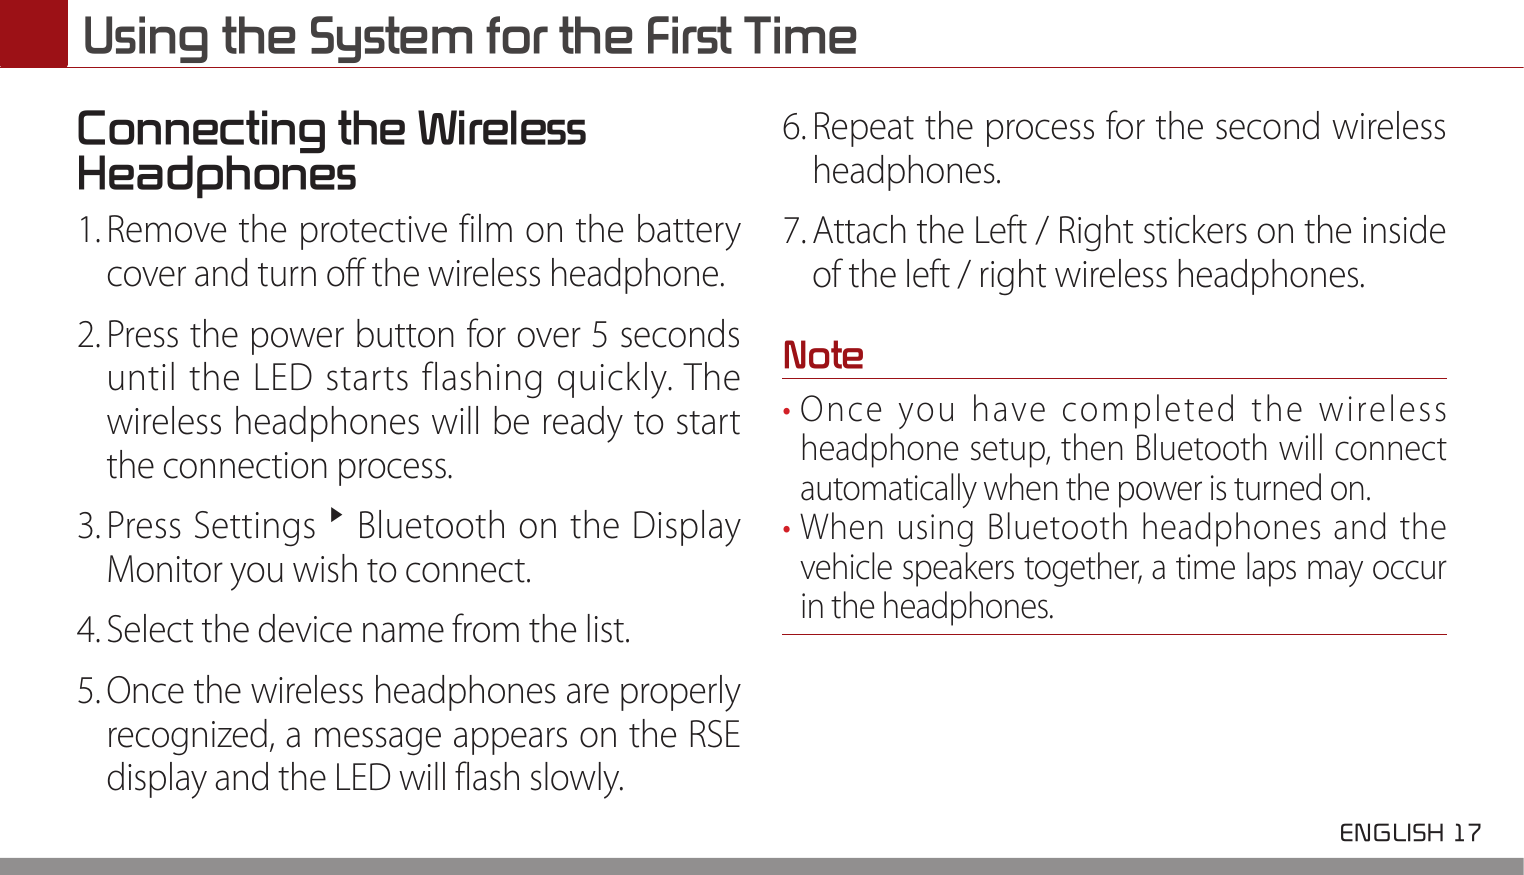  ENGLISH 17 Using the System for the First TimeConnecting the Wireless Headphones1. Remove the protective film on the battery cover and turn off the wireless headphone.2. Press the power button for over 5 seconds until the LED starts flashing quickly. The wireless headphones will be ready to start the connection process.3. Press Settings ▶ Bluetooth on the Display Monitor you wish to connect.4. Select the device name from the list. 5. Once the wireless headphones are properly recognized, a message appears on the RSE display and the LED will flash slowly.6. Repeat the process for the second wireless headphones.7. Attach the Left / Right stickers on the inside of the left / right wireless headphones.Note• Once you have completed the wireless headphone setup, then Bluetooth will connect automatically when the power is turned on.• When using Bluetooth headphones and the vehicle speakers together, a time laps may occur in the headphones.